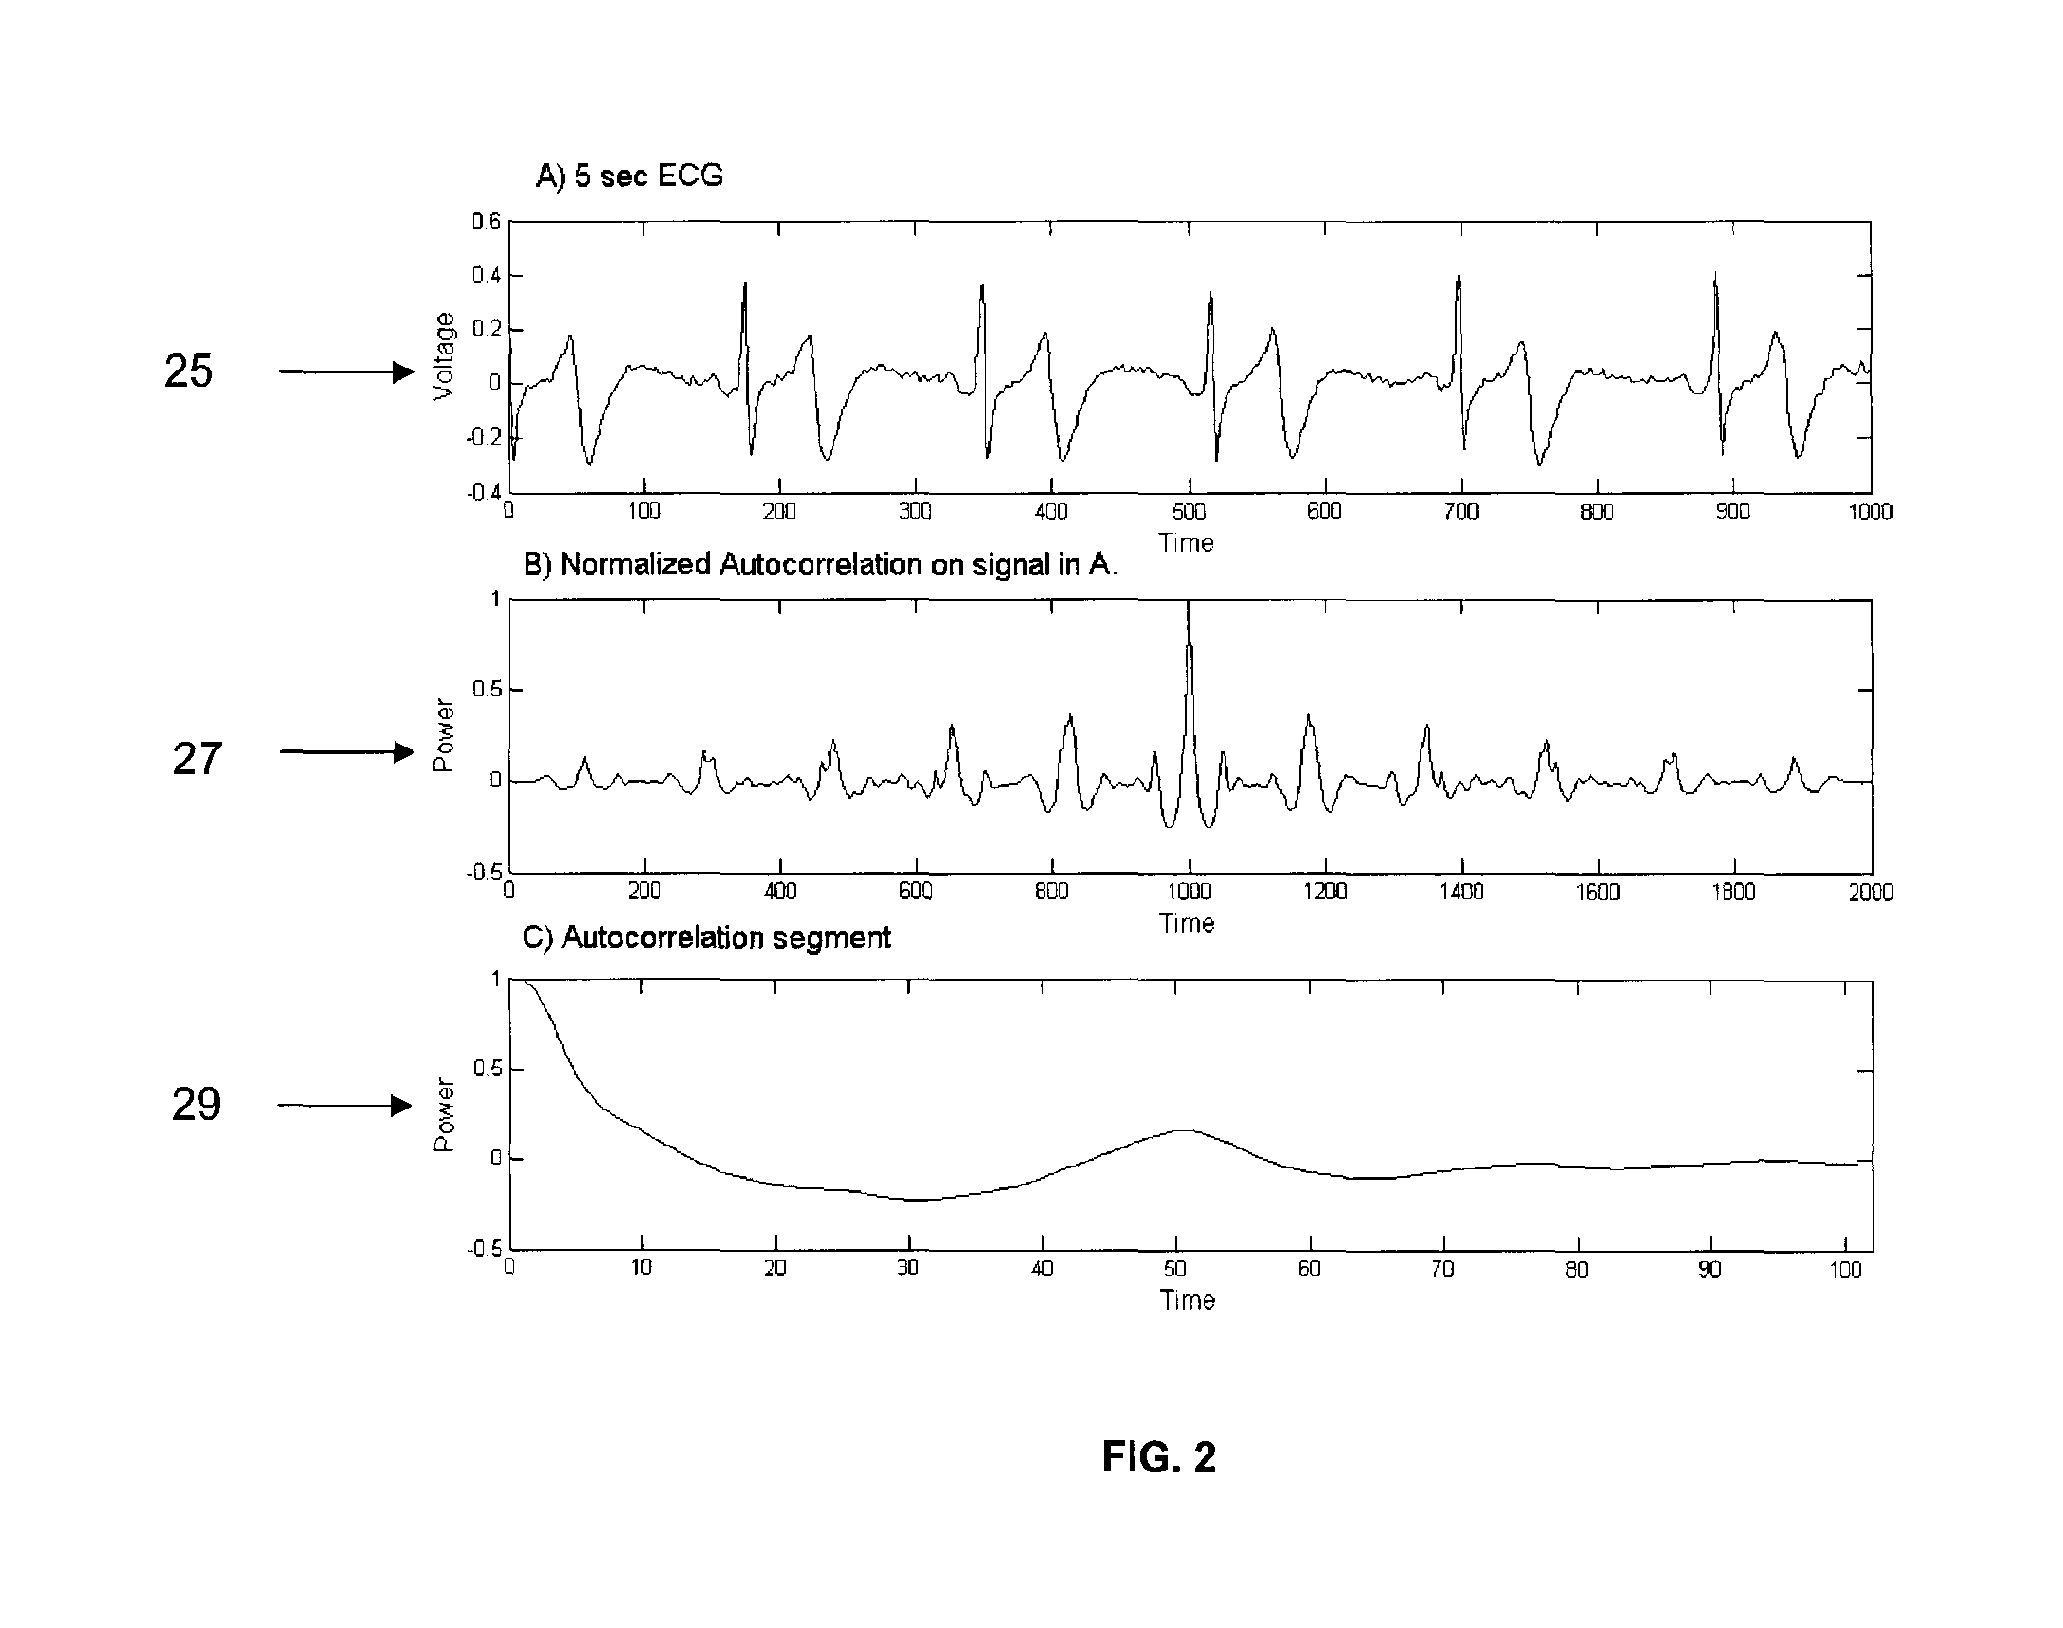 System and method for enabling continuous or instantaneous identity recognition based on physiological biometric signals